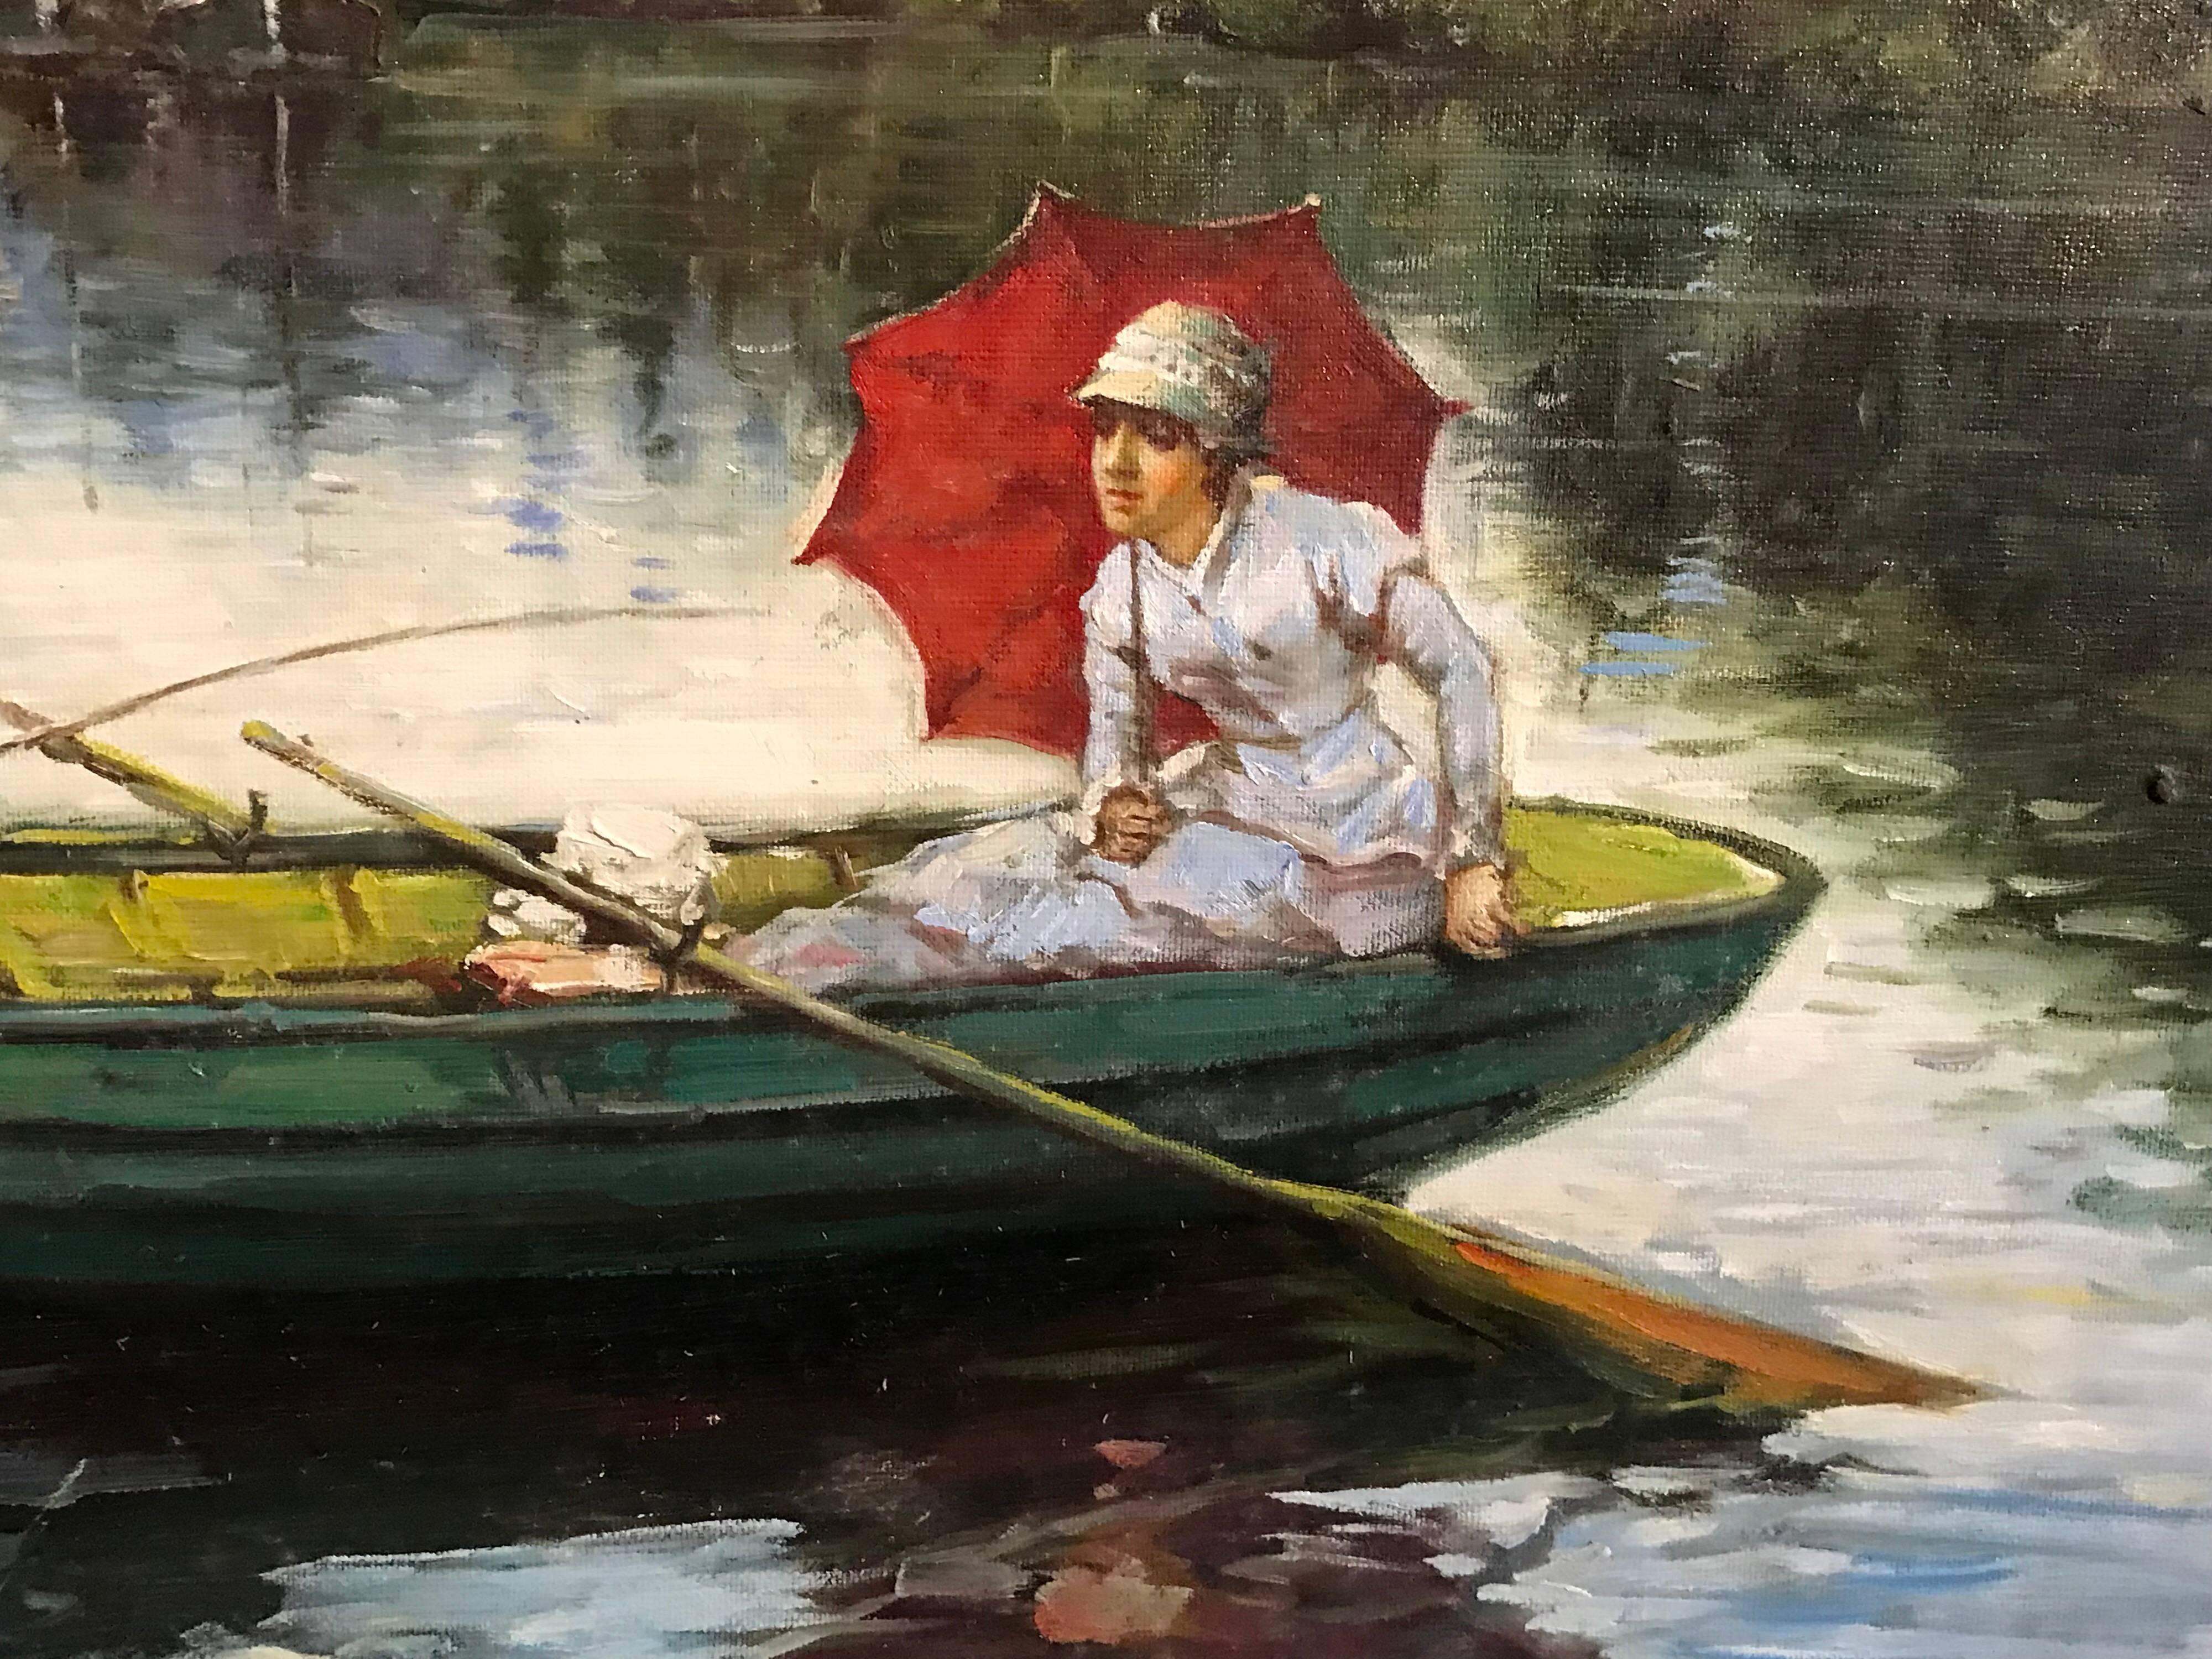 Punting on the River, large oil painting on canvas - Impressionist Painting by Unknown